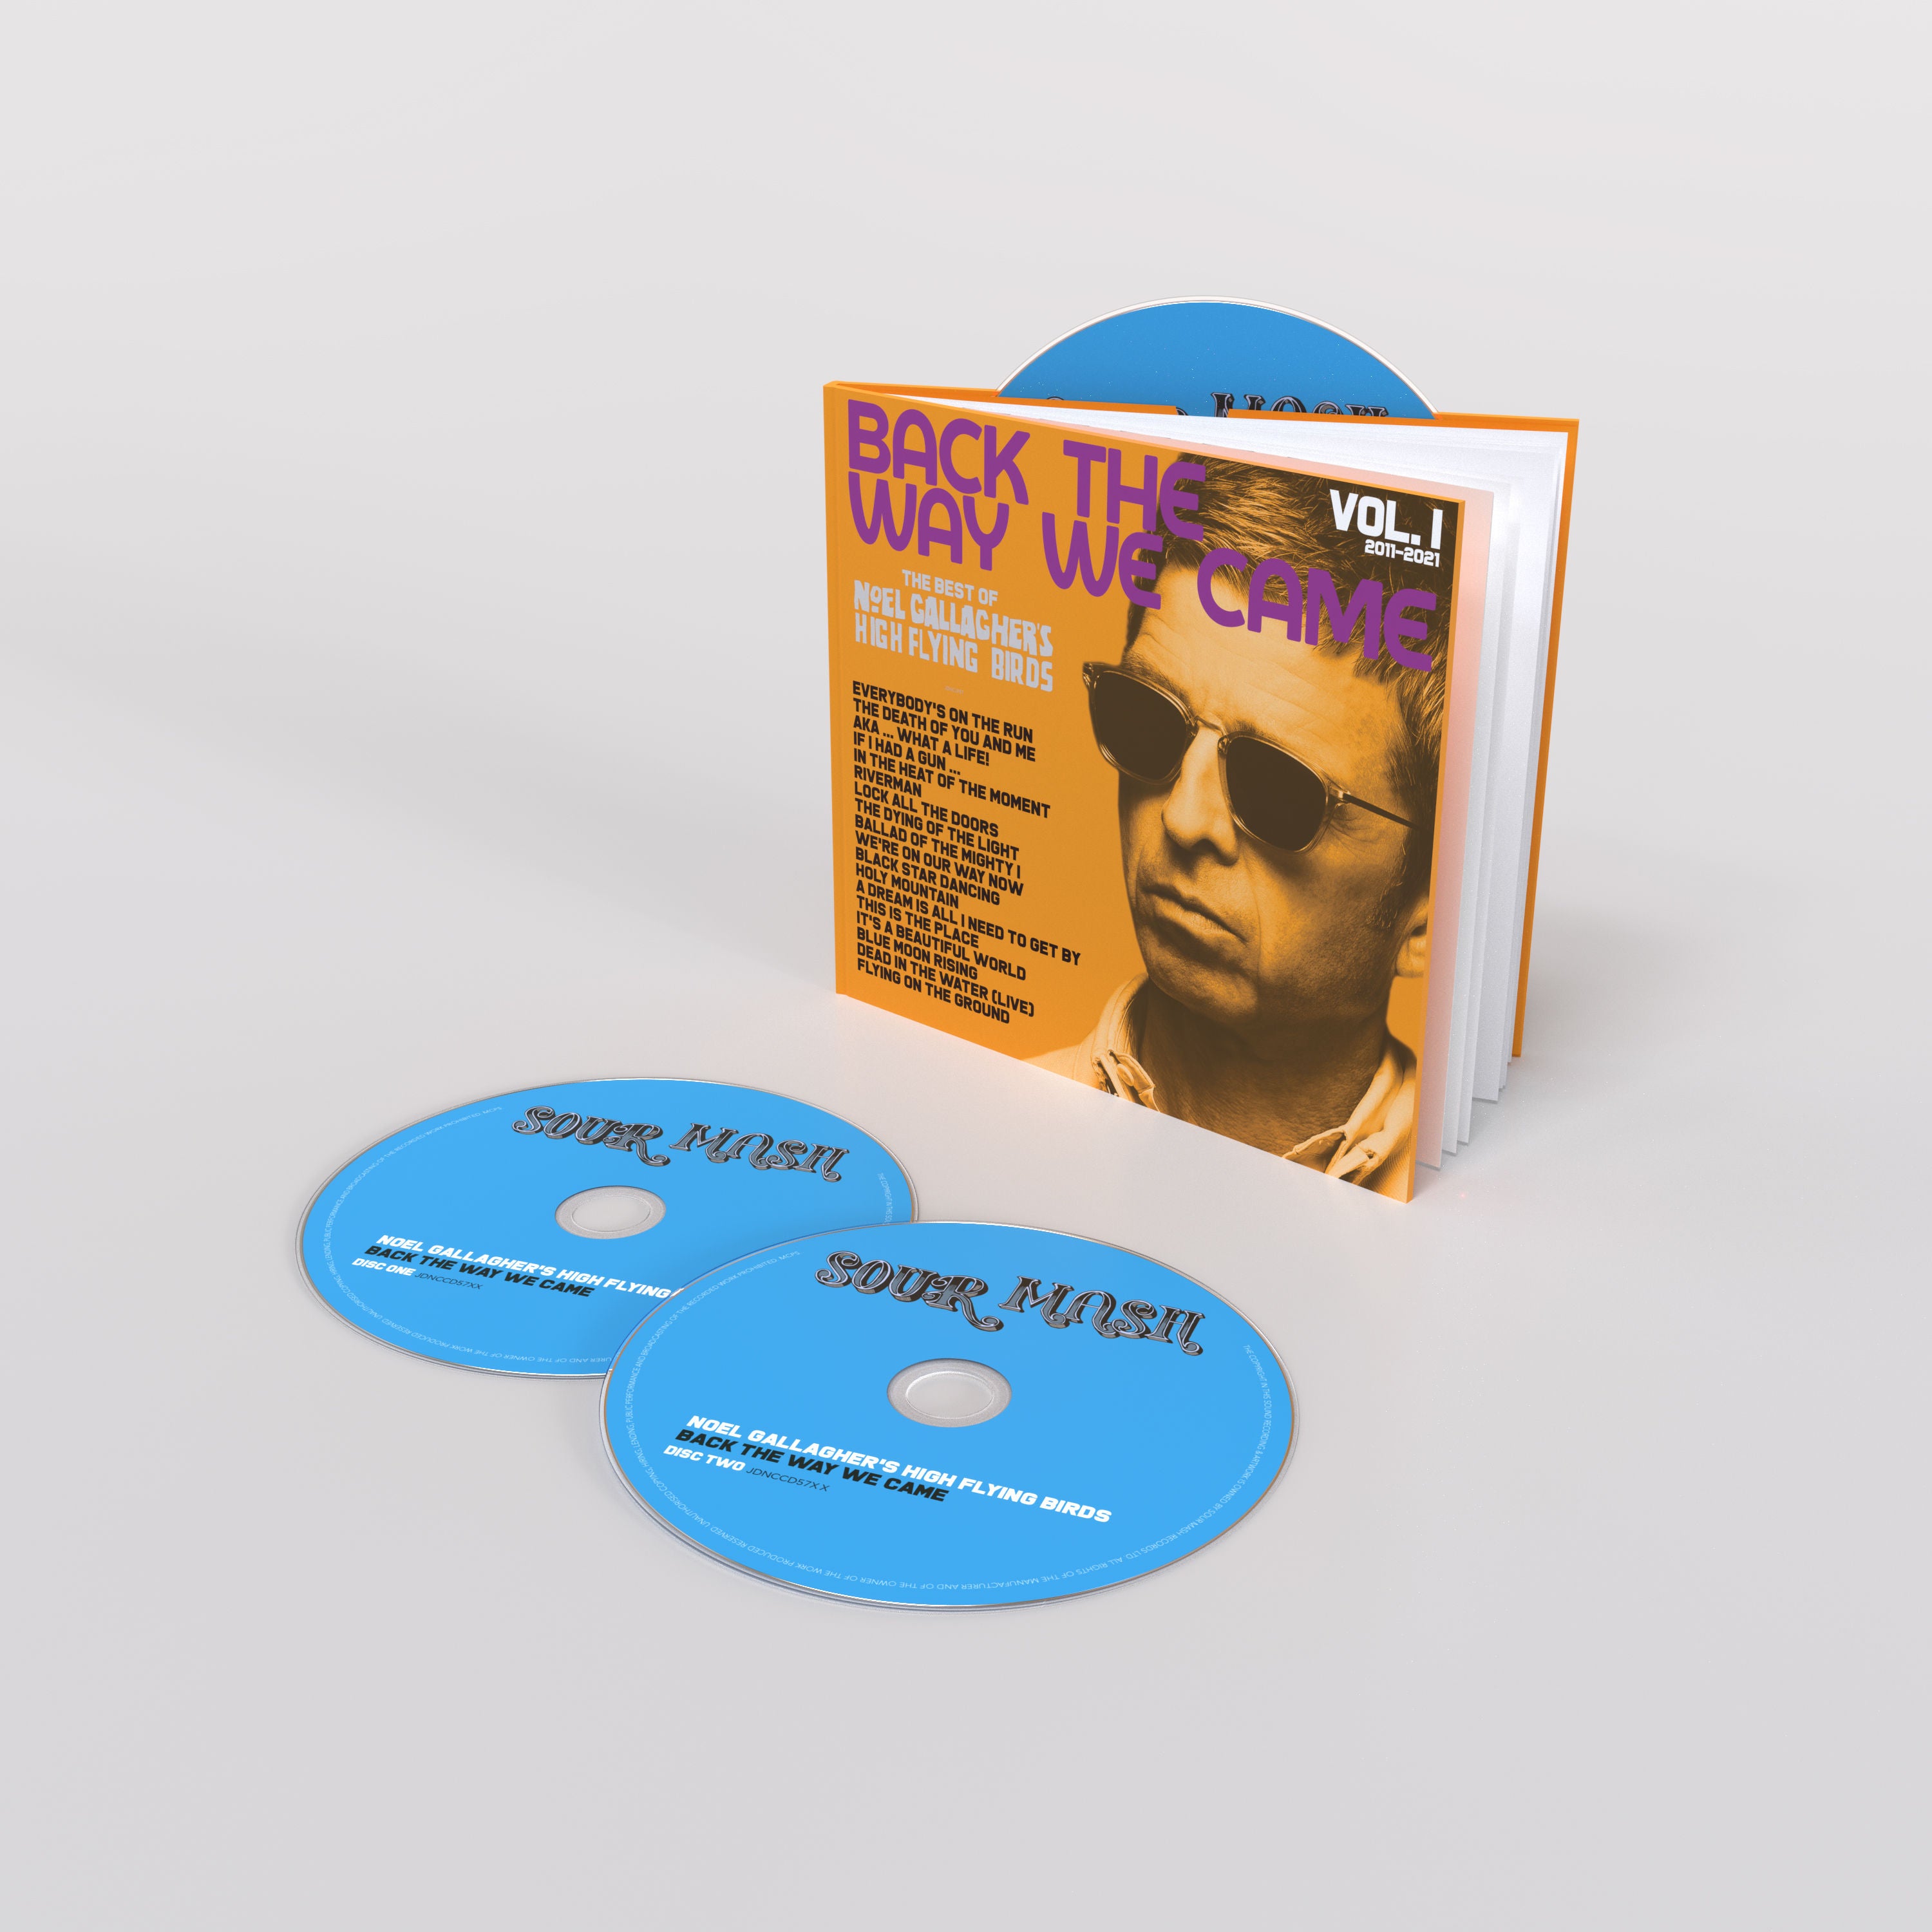 Noel Gallagher's High Flying Birds - Back The Way We Came: Vol. 1 (2011 - 2021) [Deluxe CD]